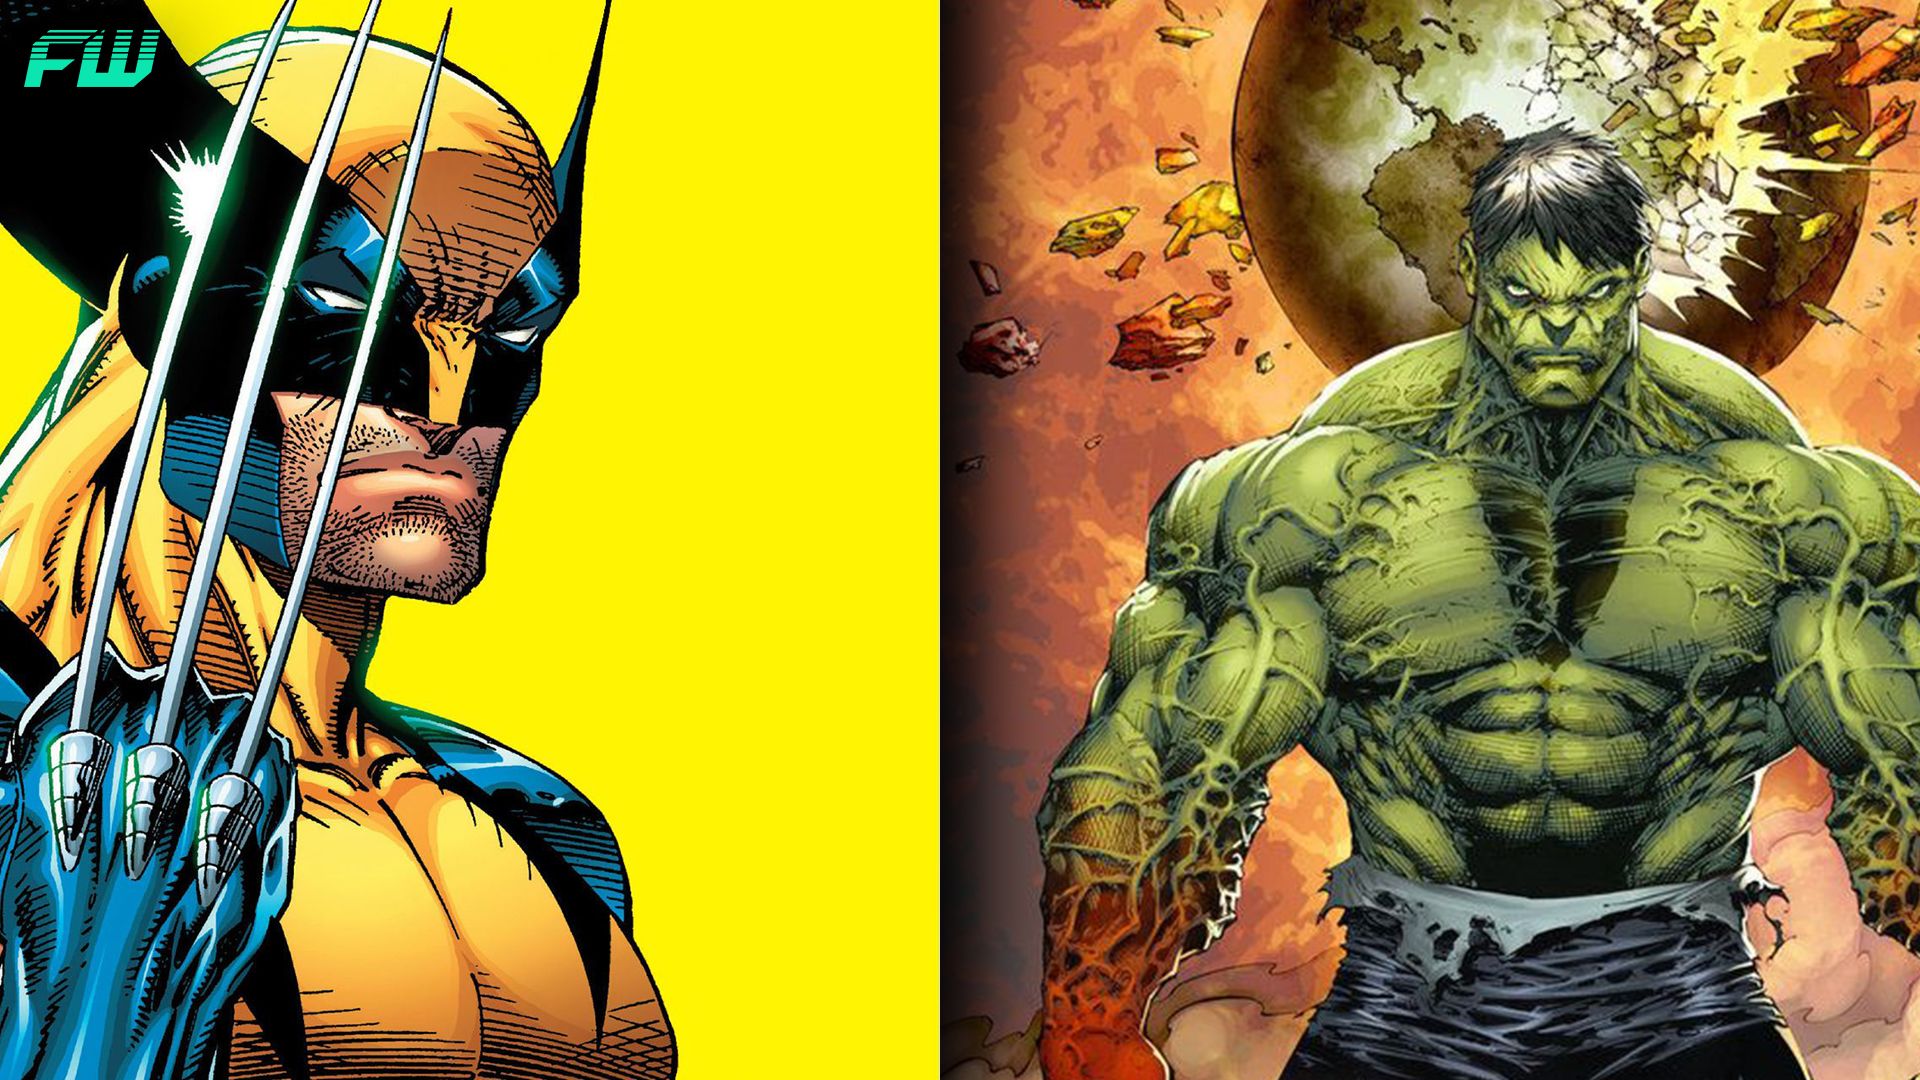 The Incredible Hulk vs The Wolverine: Who Really Wins?